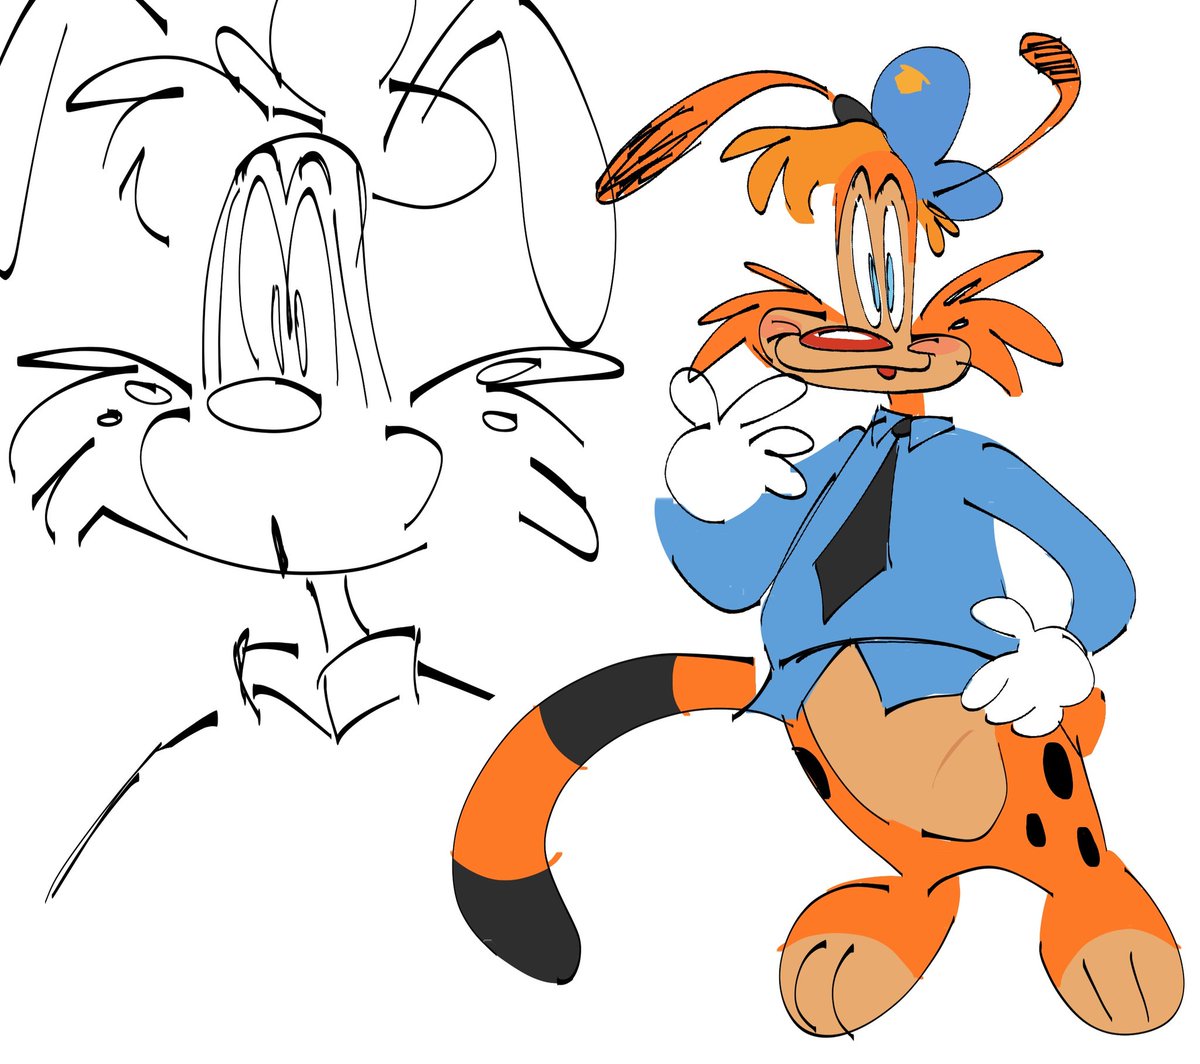 Bonkers is a funny guy to draw 